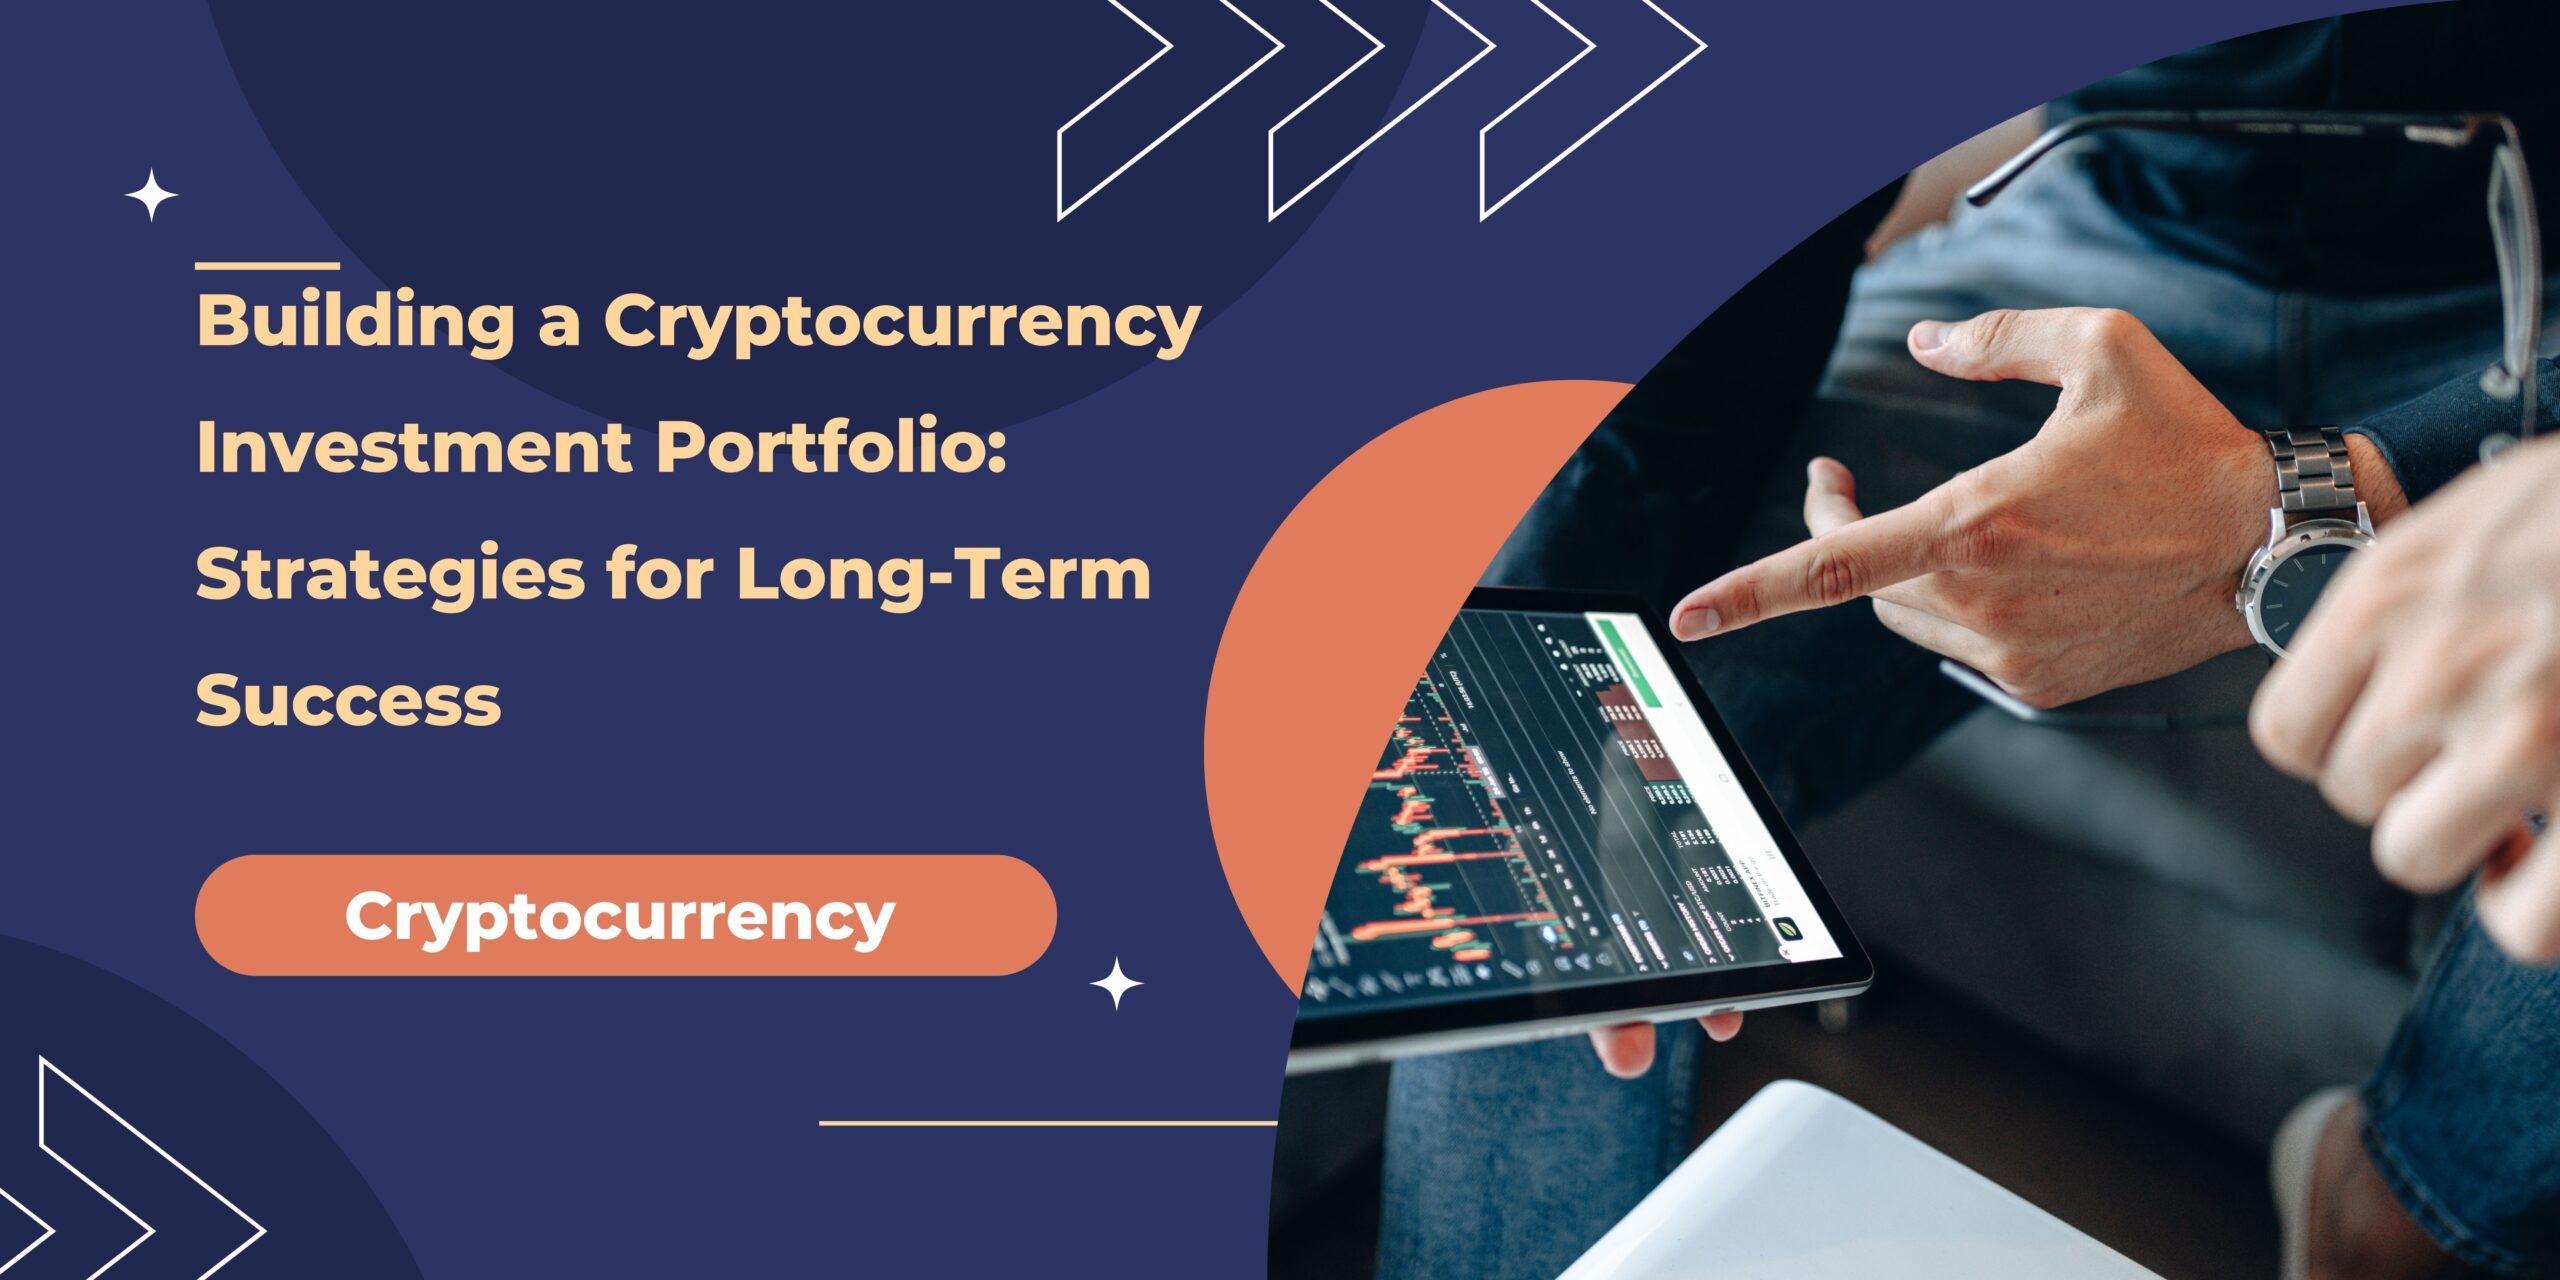 Building a Cryptocurrency Investment Portfolio: Strategies for Long-Term Success